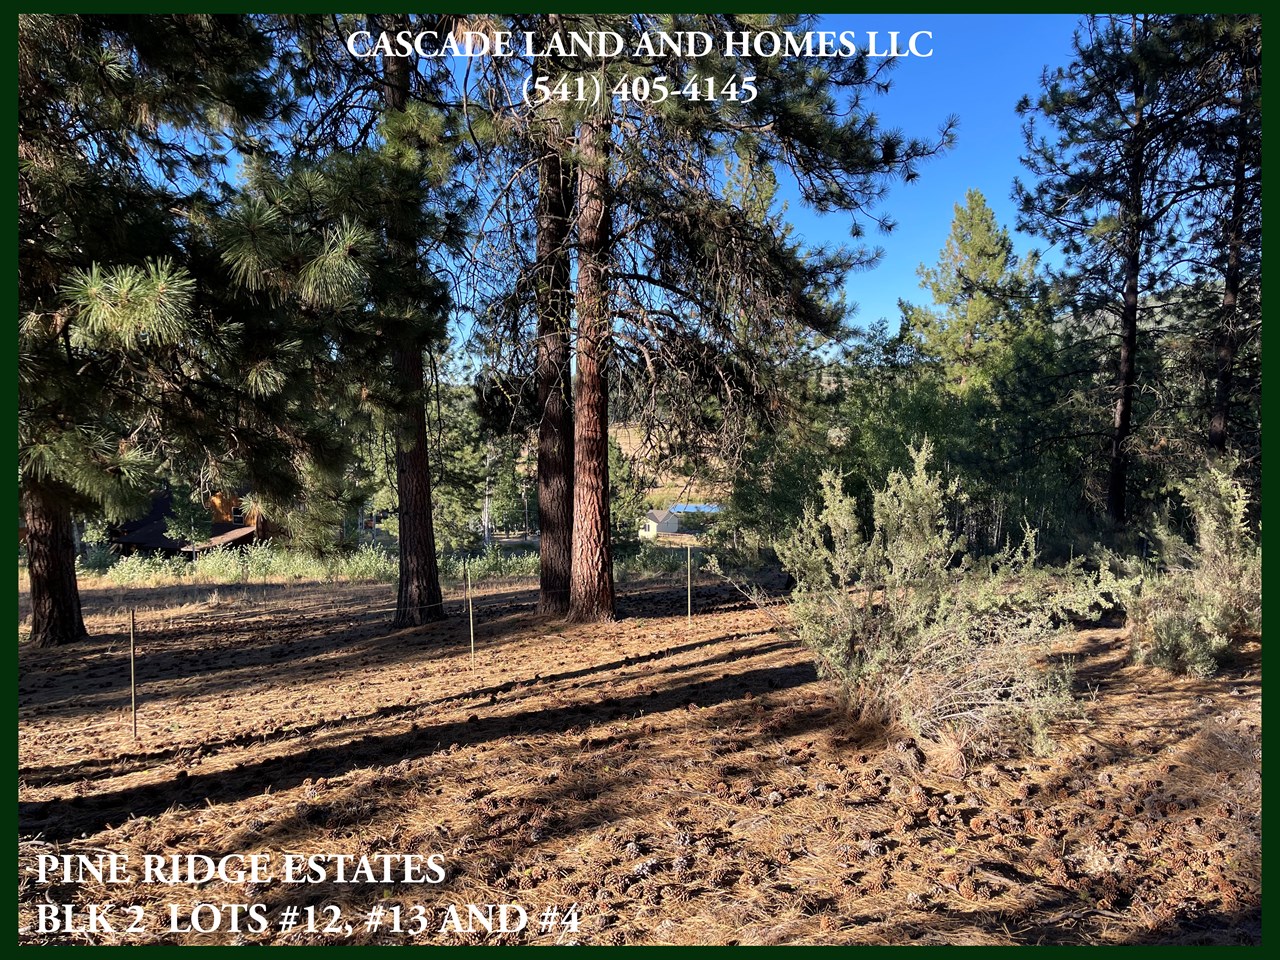 the tall pines on the property really give you the feeling of being out in the forest. it's quiet here. the noise you hear is just the wind in the trees and an rare, occasional neighbor passing by. it is a very peaceful spot. perfect for your new homesite!